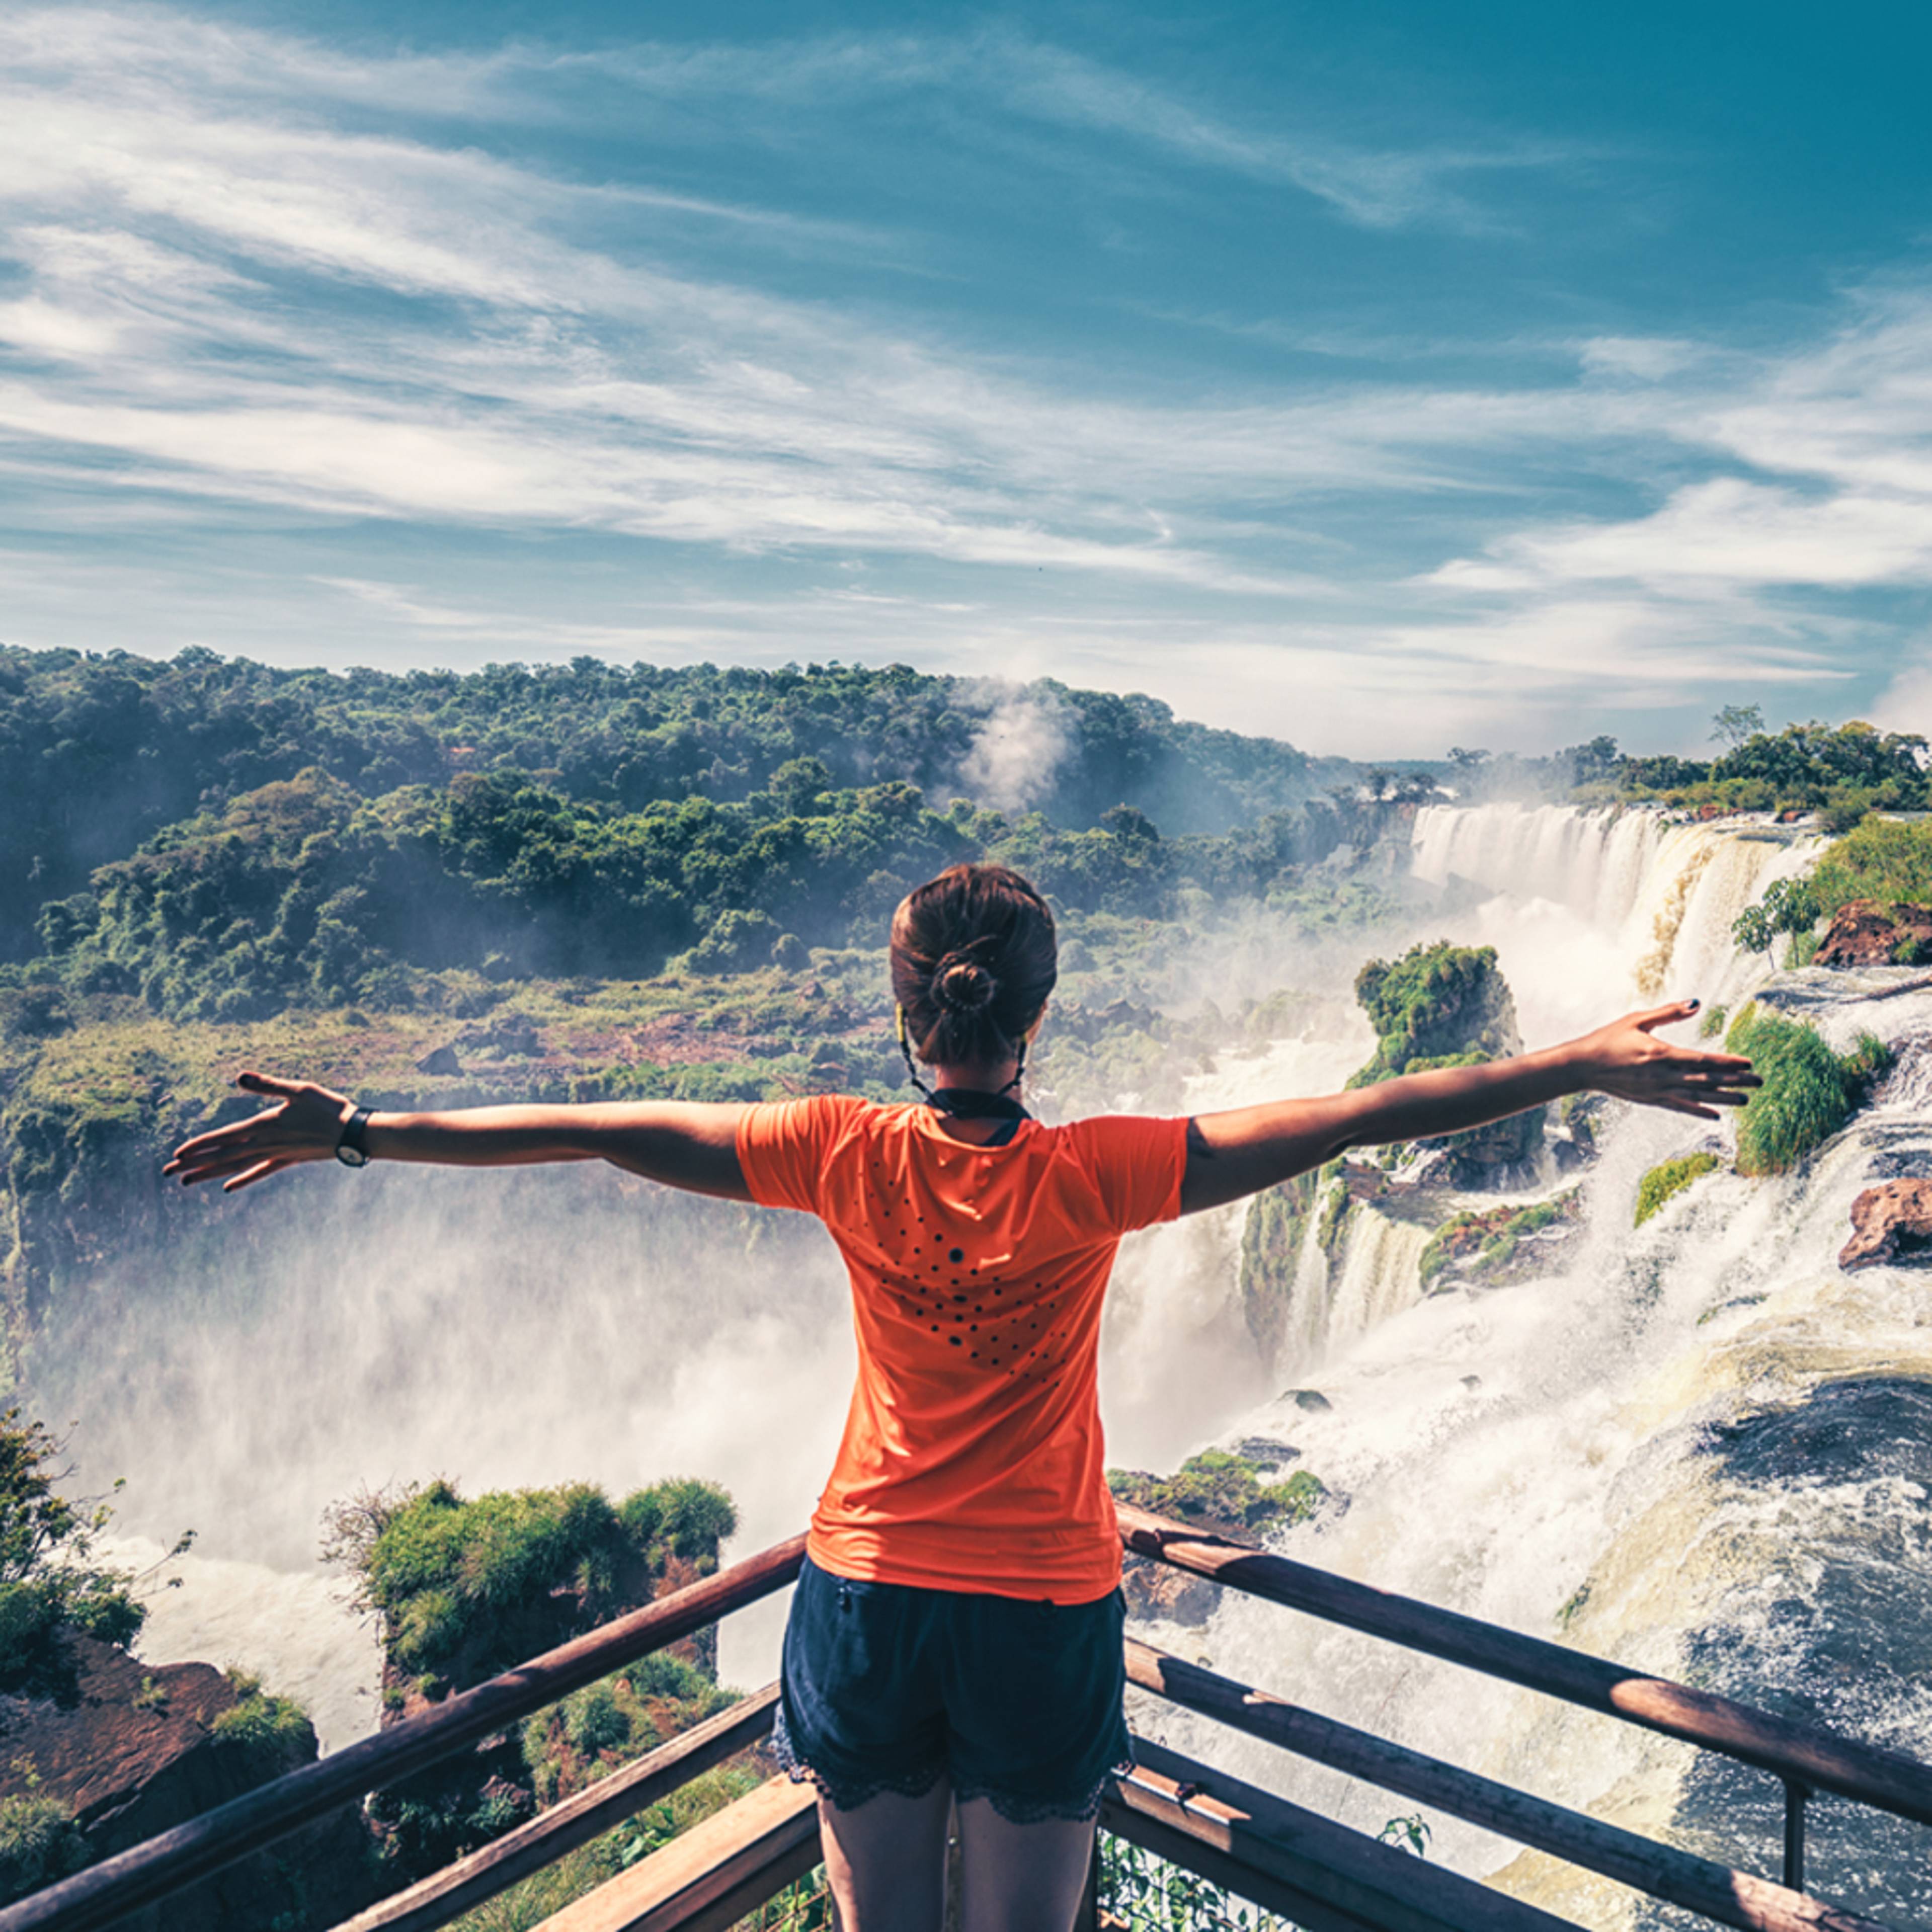 Design your perfect adventure trip with a local expert in Brazil